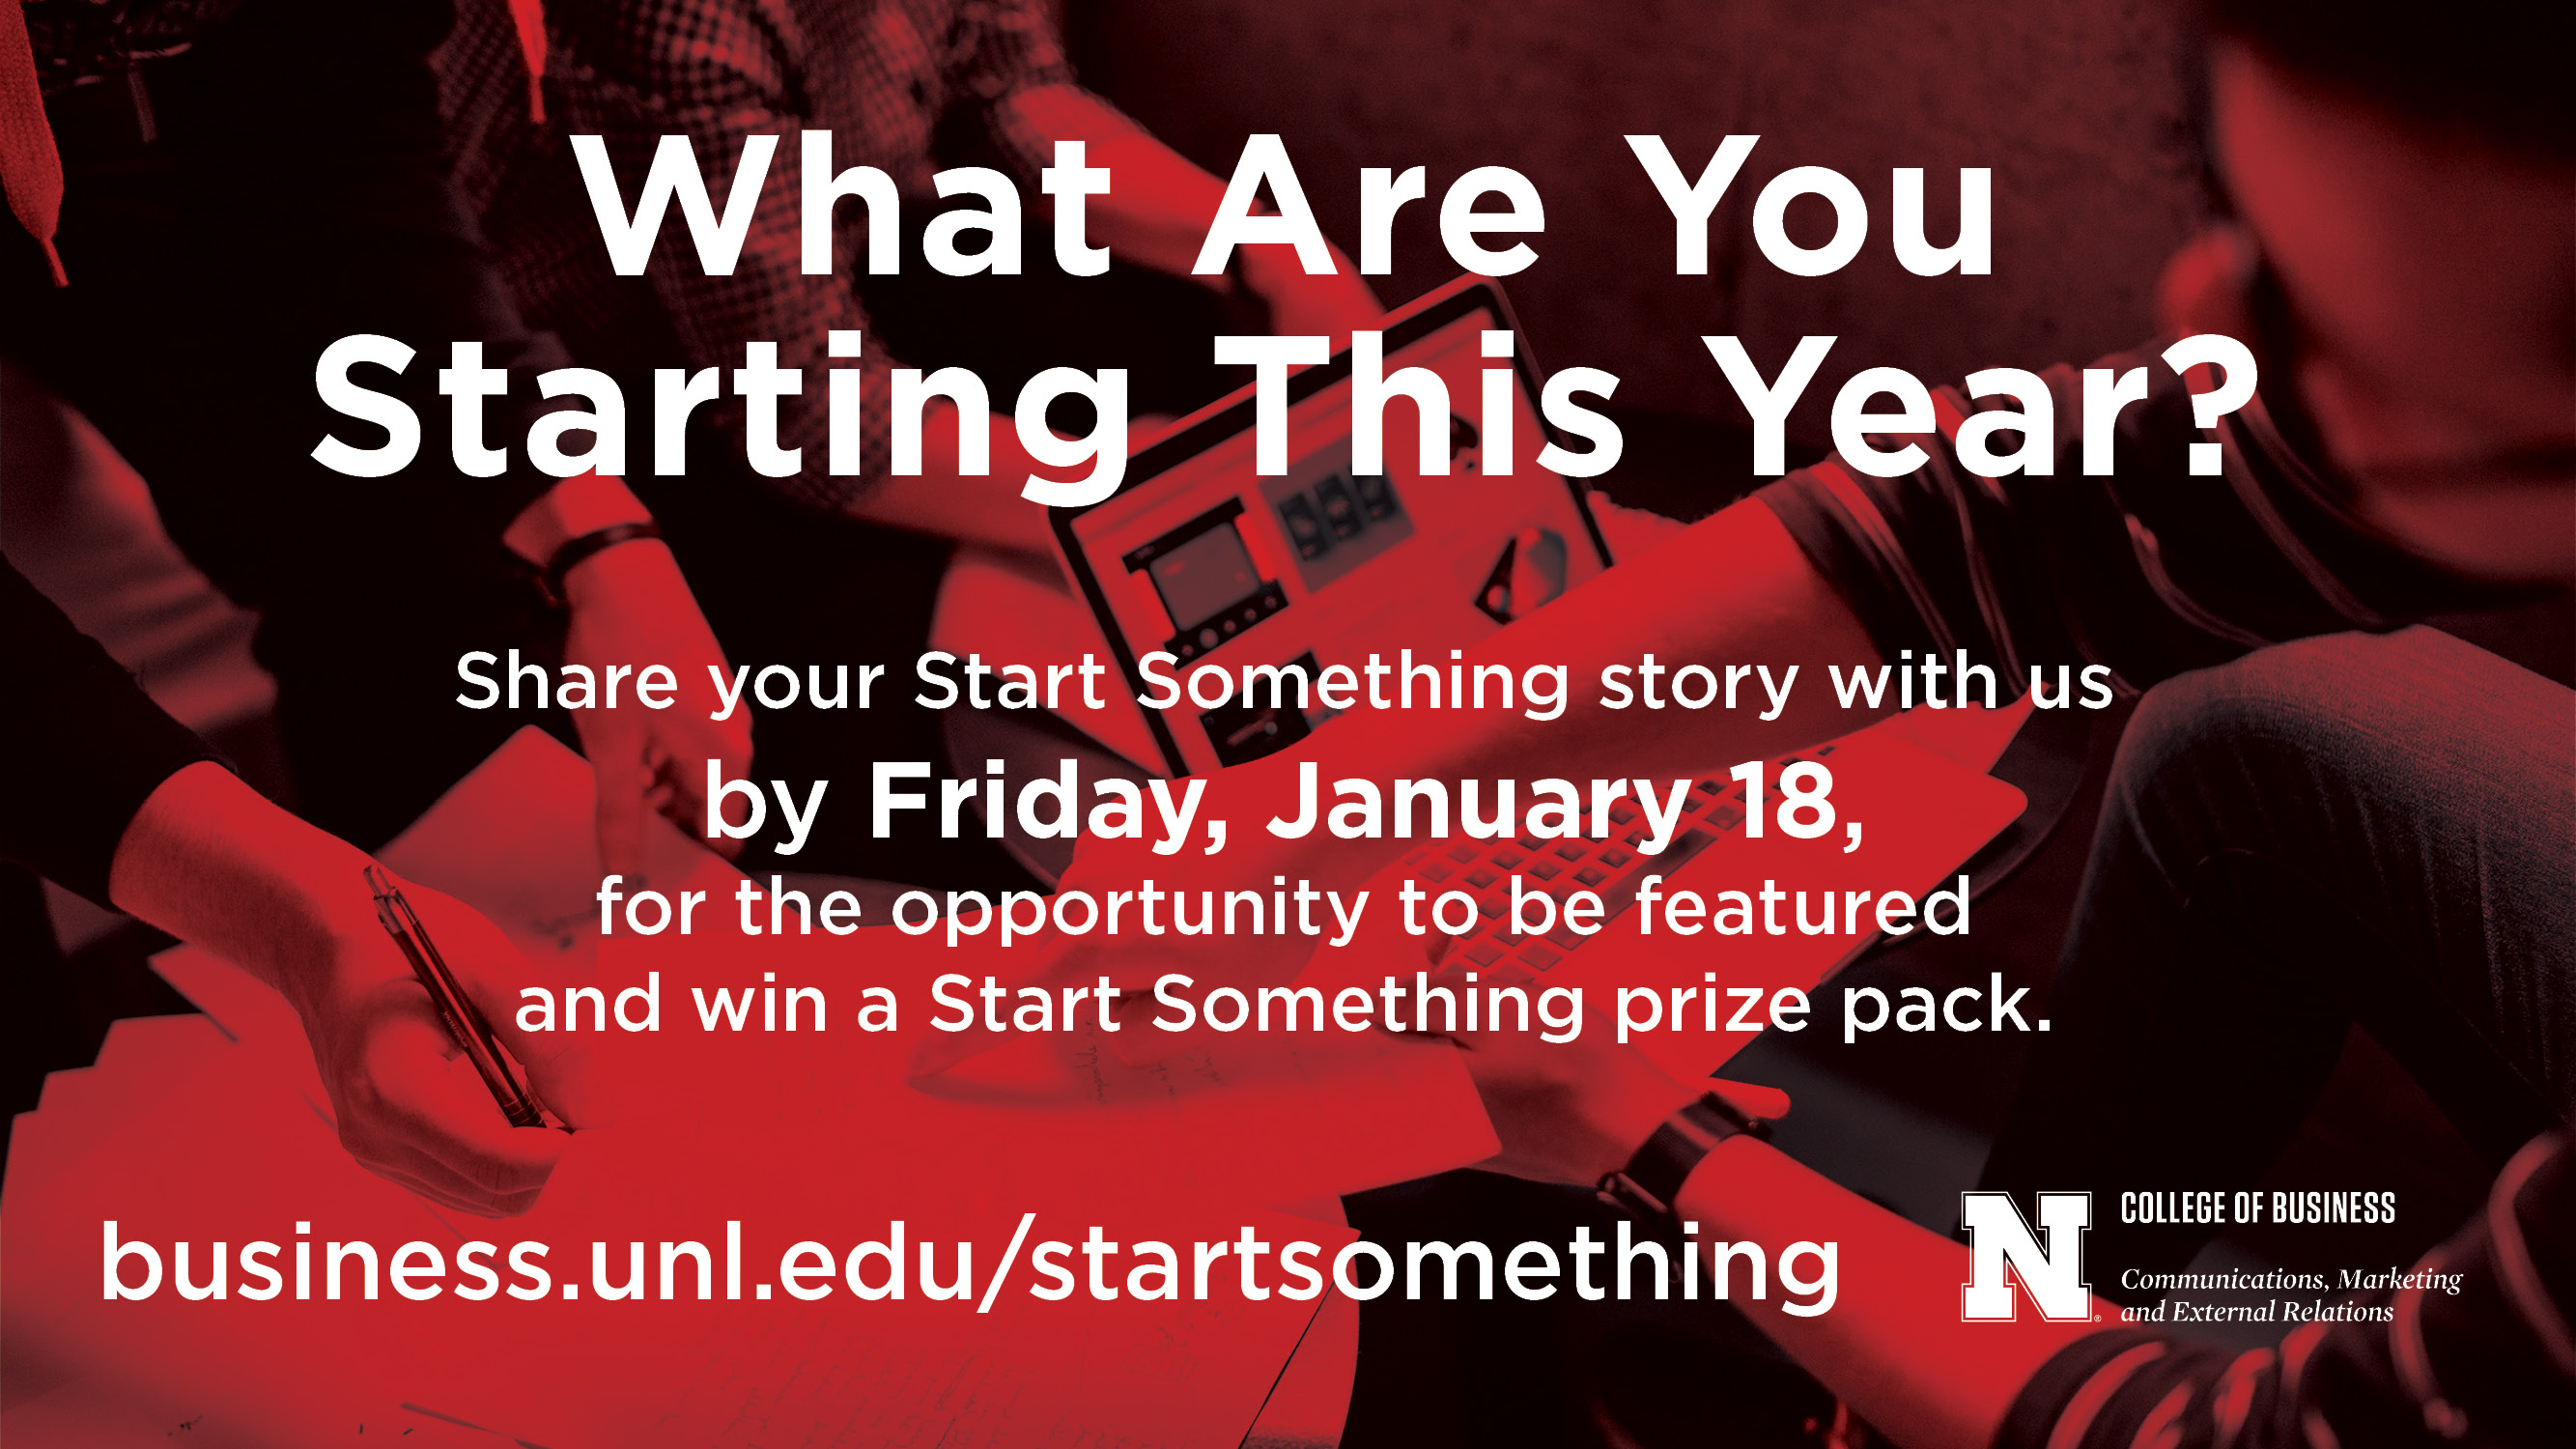 What are you starting this year